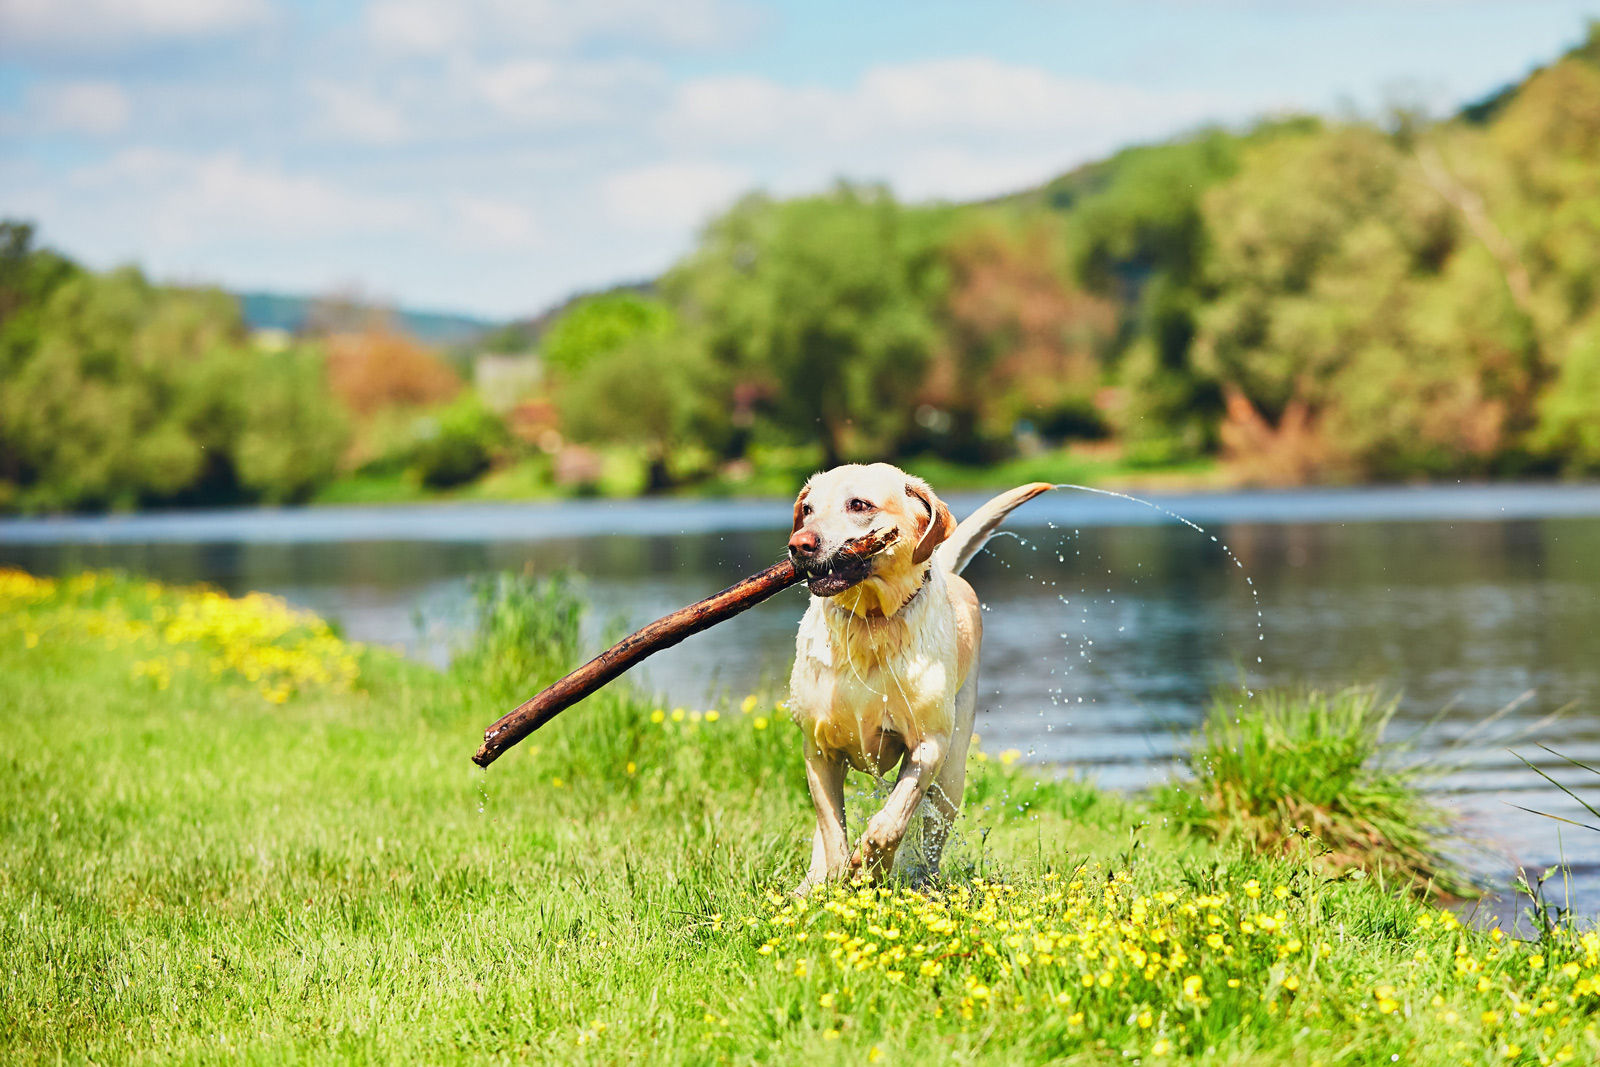 Let your dog run, fetch and play at one of the many dog parks located near Comfort Suites Kelowna pet-friendly hotel.